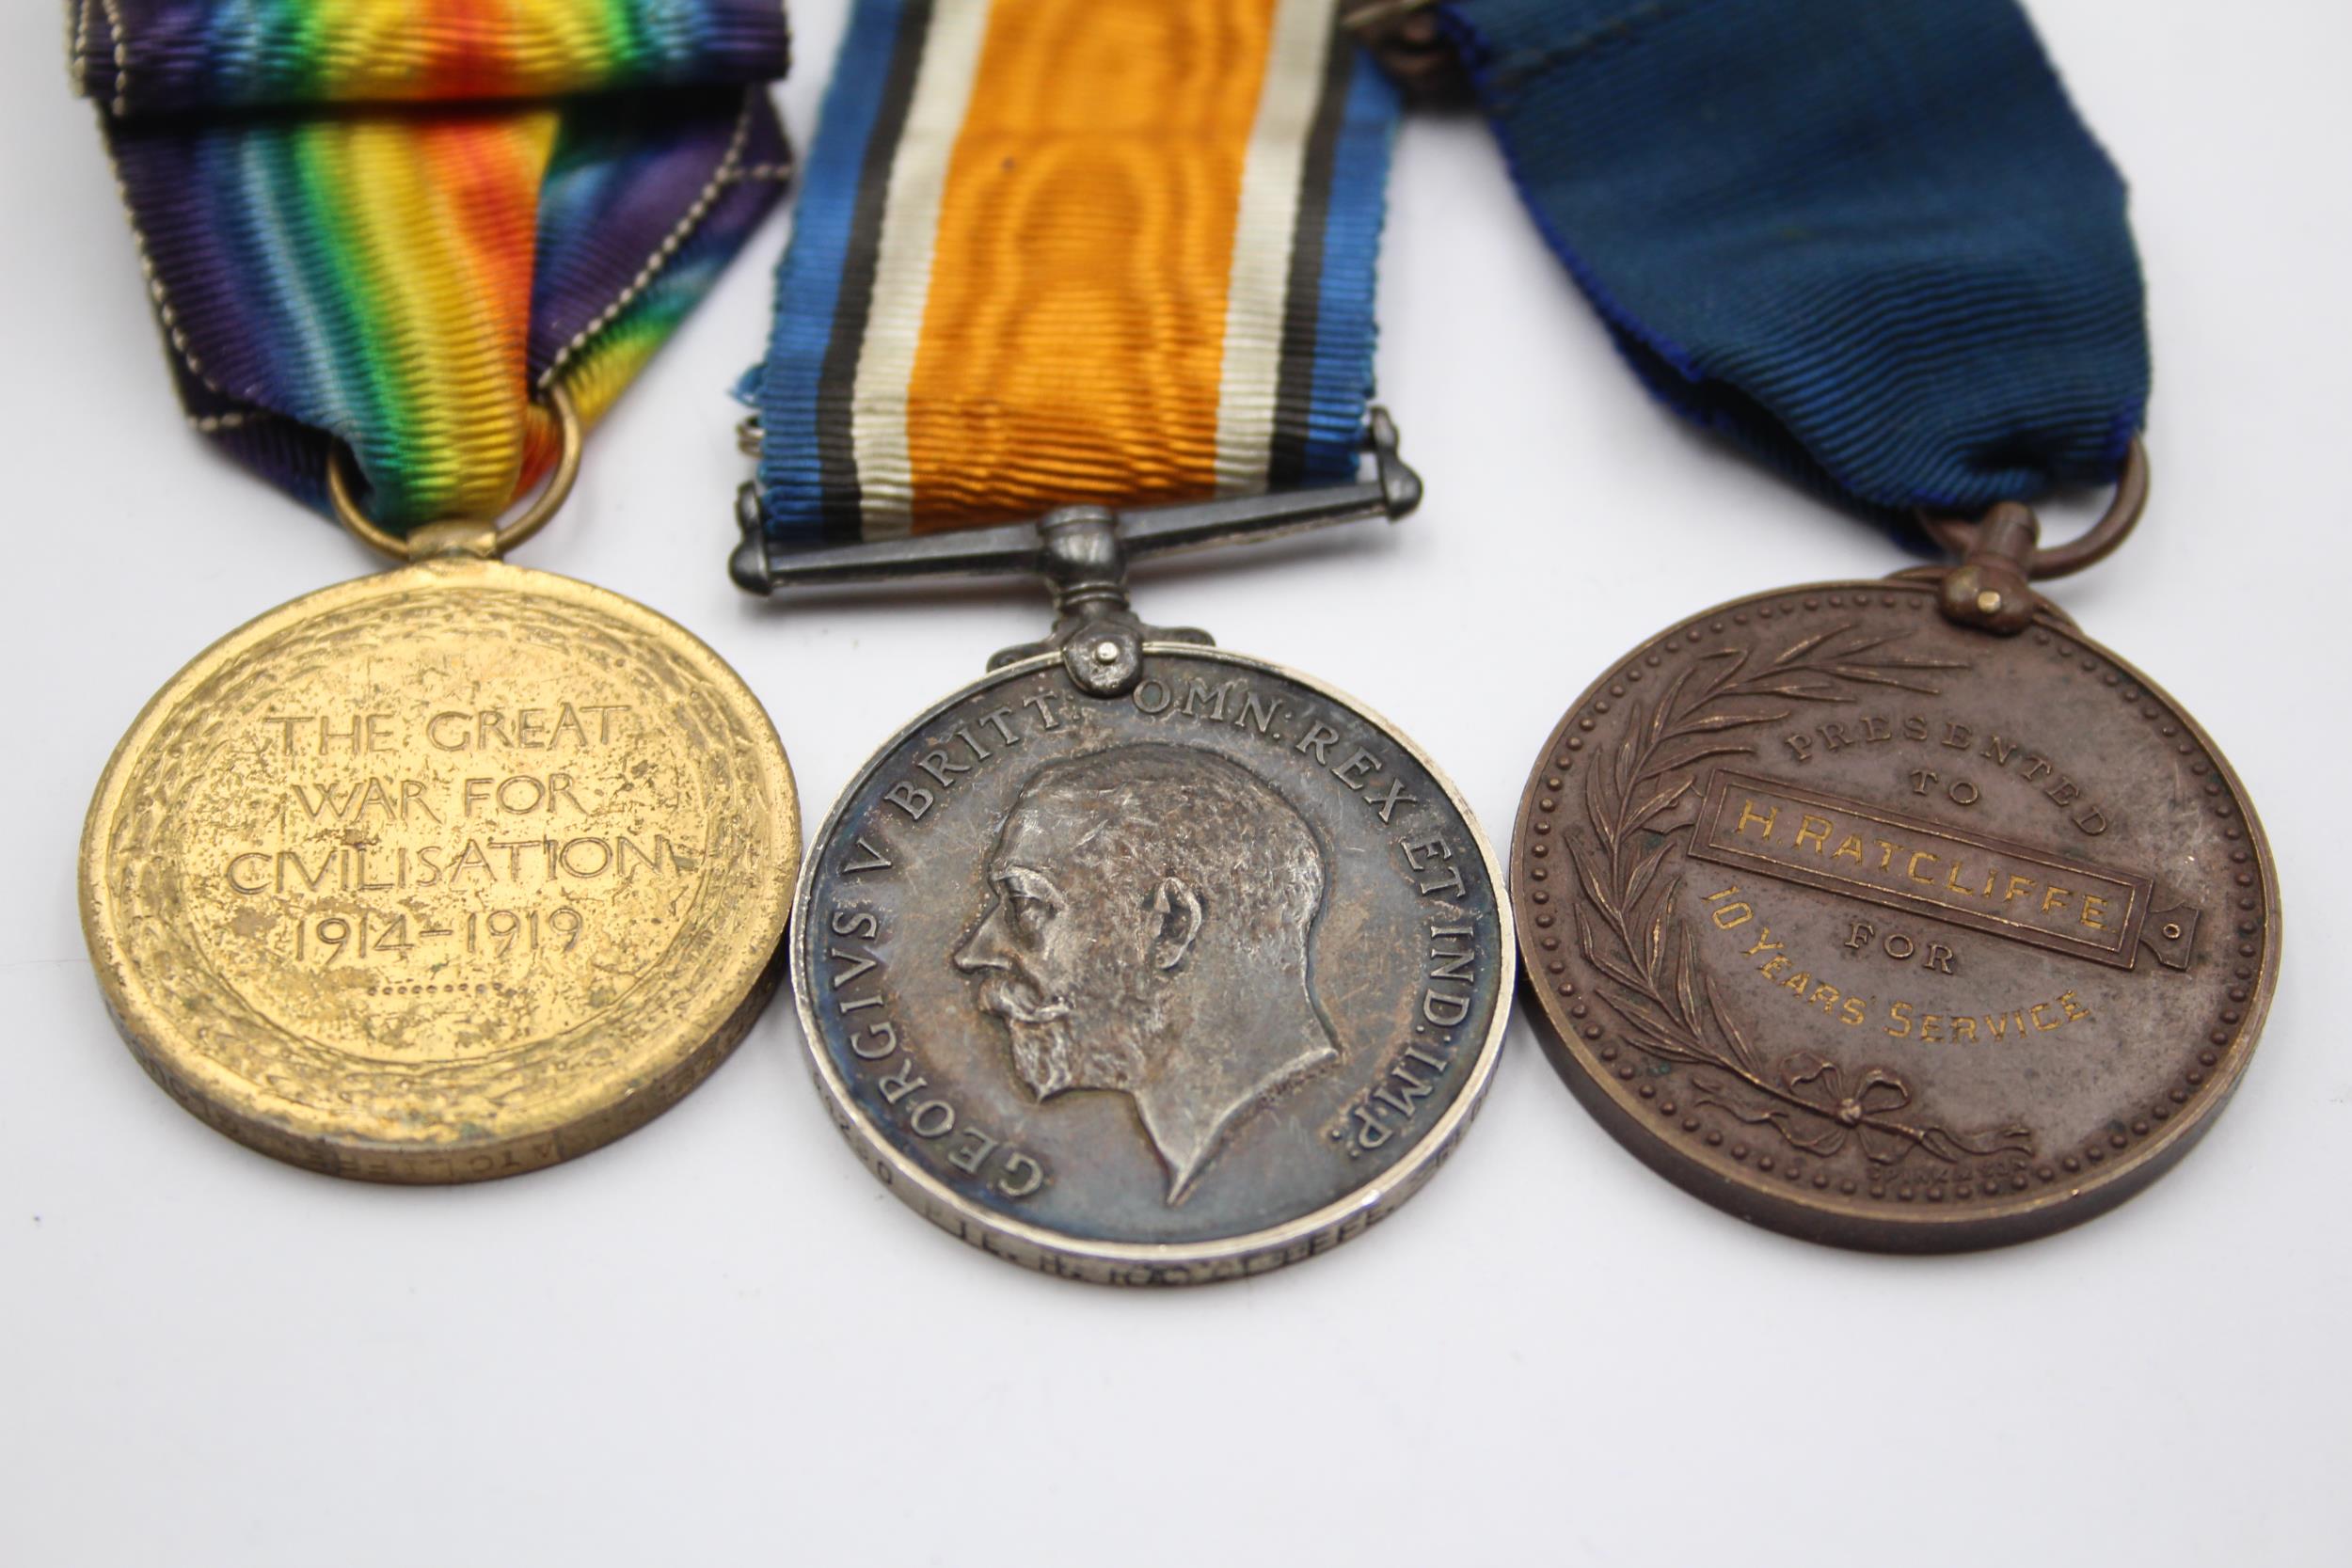 WW1 Firebrigade Medal Group Pair 34290 Pte Ratcliffe Gloster R, Fire 10yr // In antique condition - Image 5 of 5